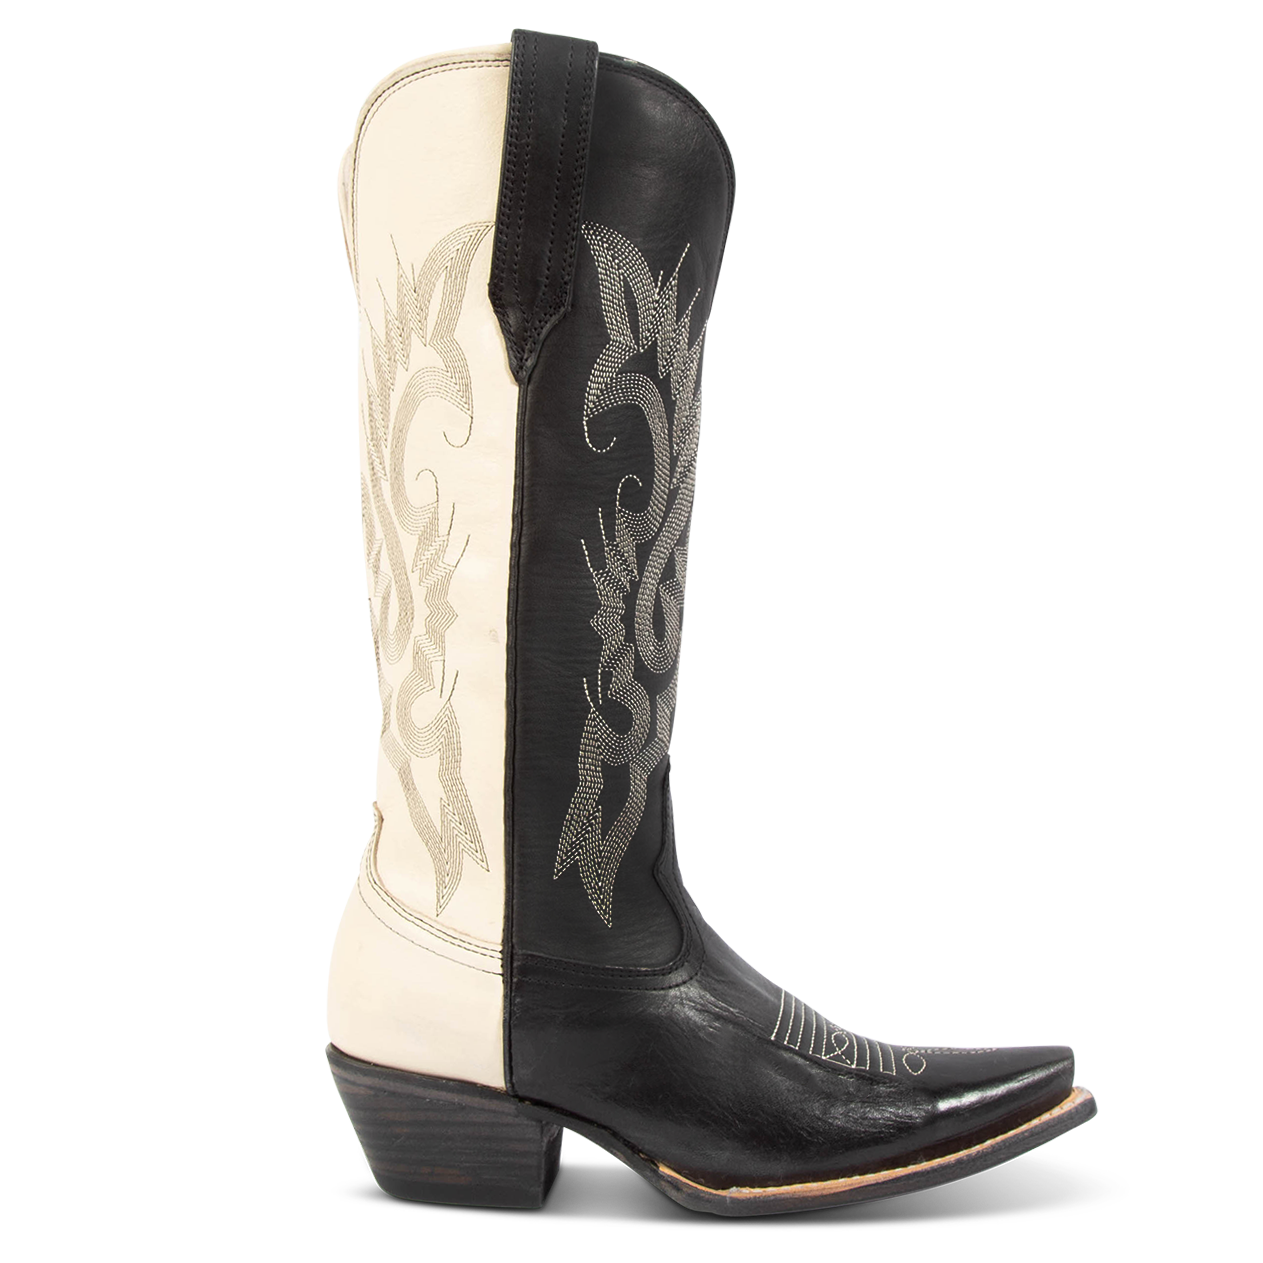 FREEBIRD women's Woodland black white multi cowboy boot with stitch detailing and snip toe construction